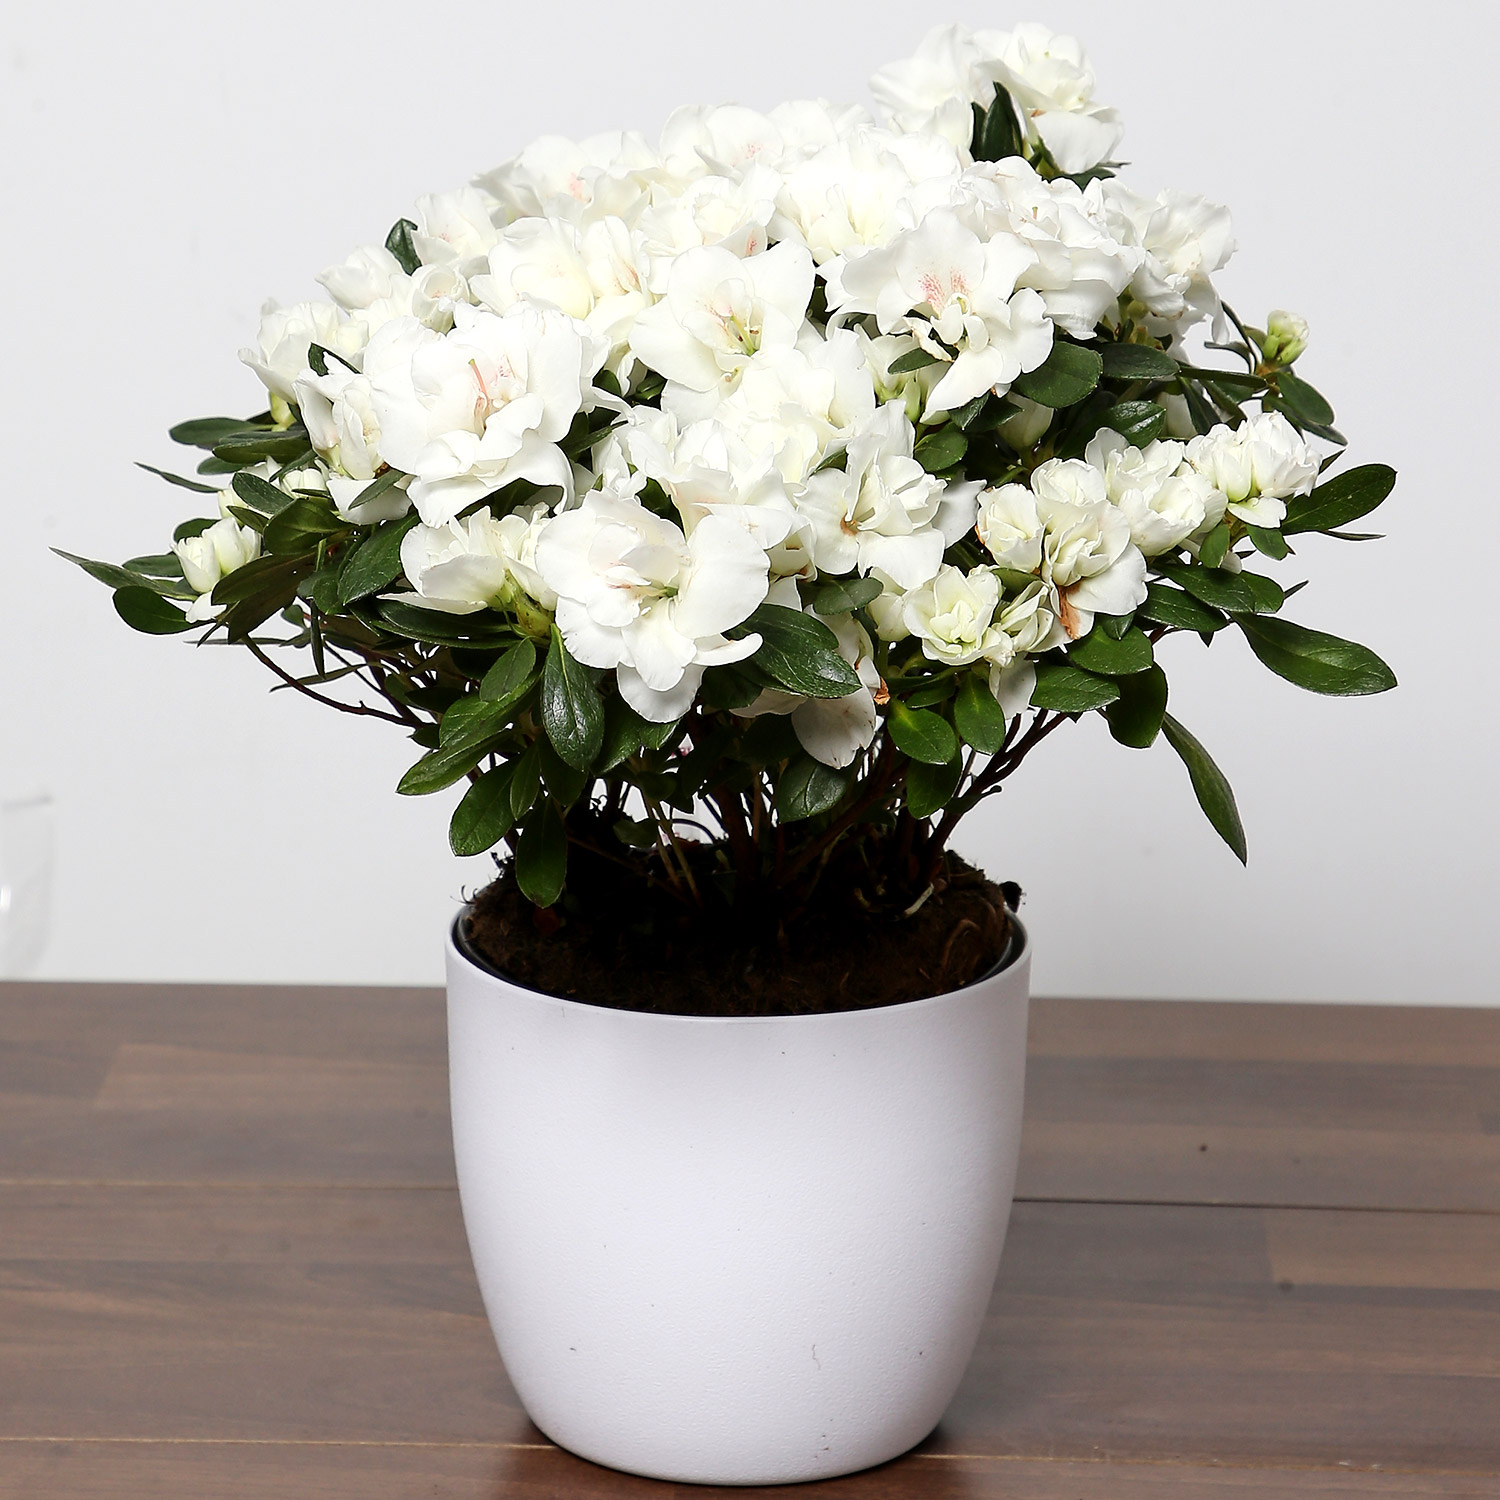 Online Beautiful White Azalea Plant Gift Delivery in Singapore - Ferns ...